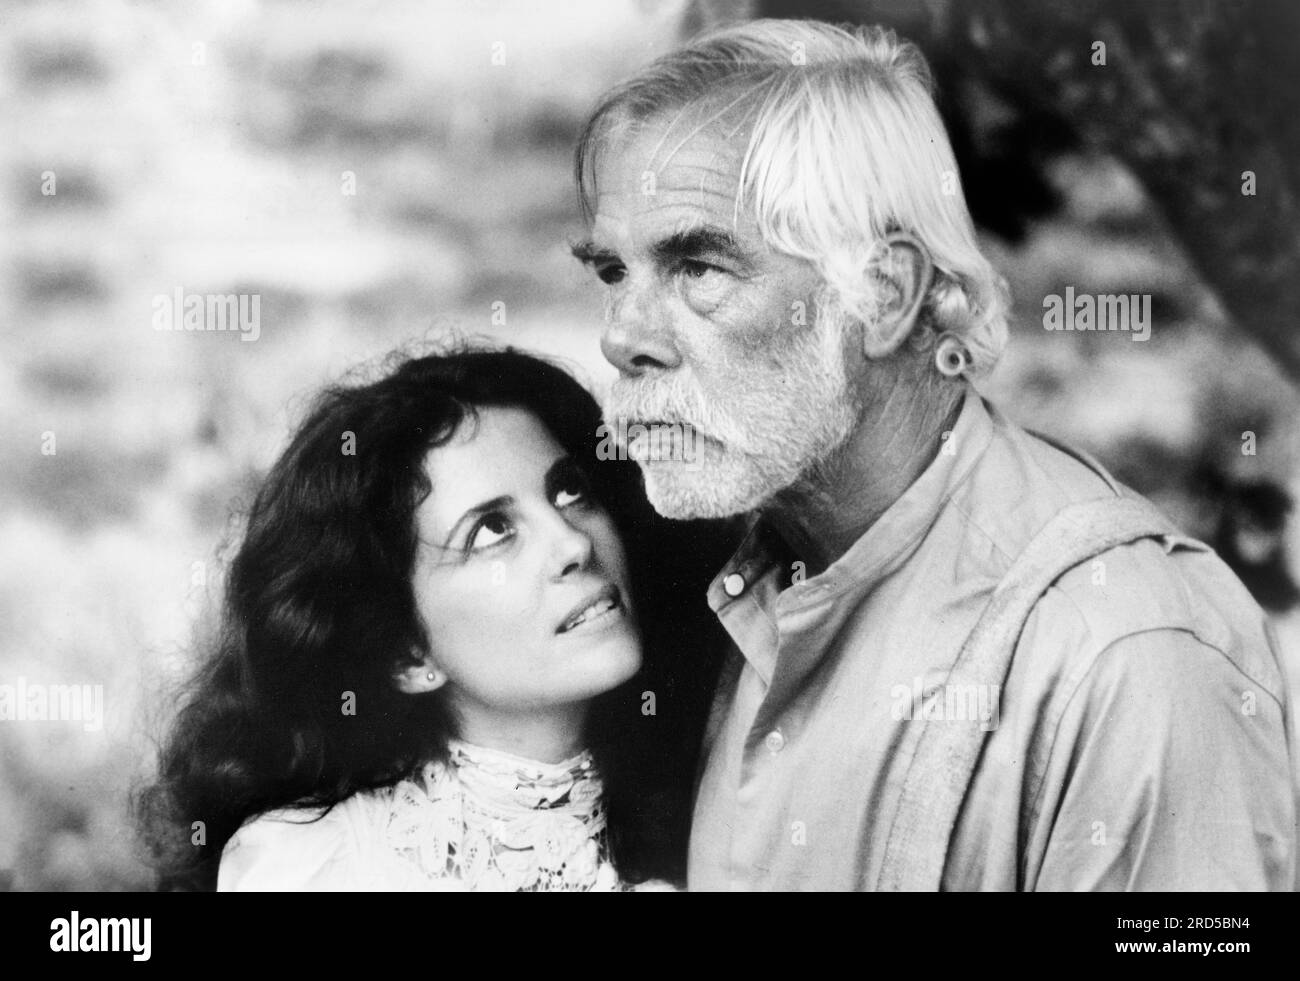 Barbara Parkins, Lee Marvin, on-set of the British Film, 'Shout At The Devil', Hemdale, American International Pictures, 1976 Stock Photo